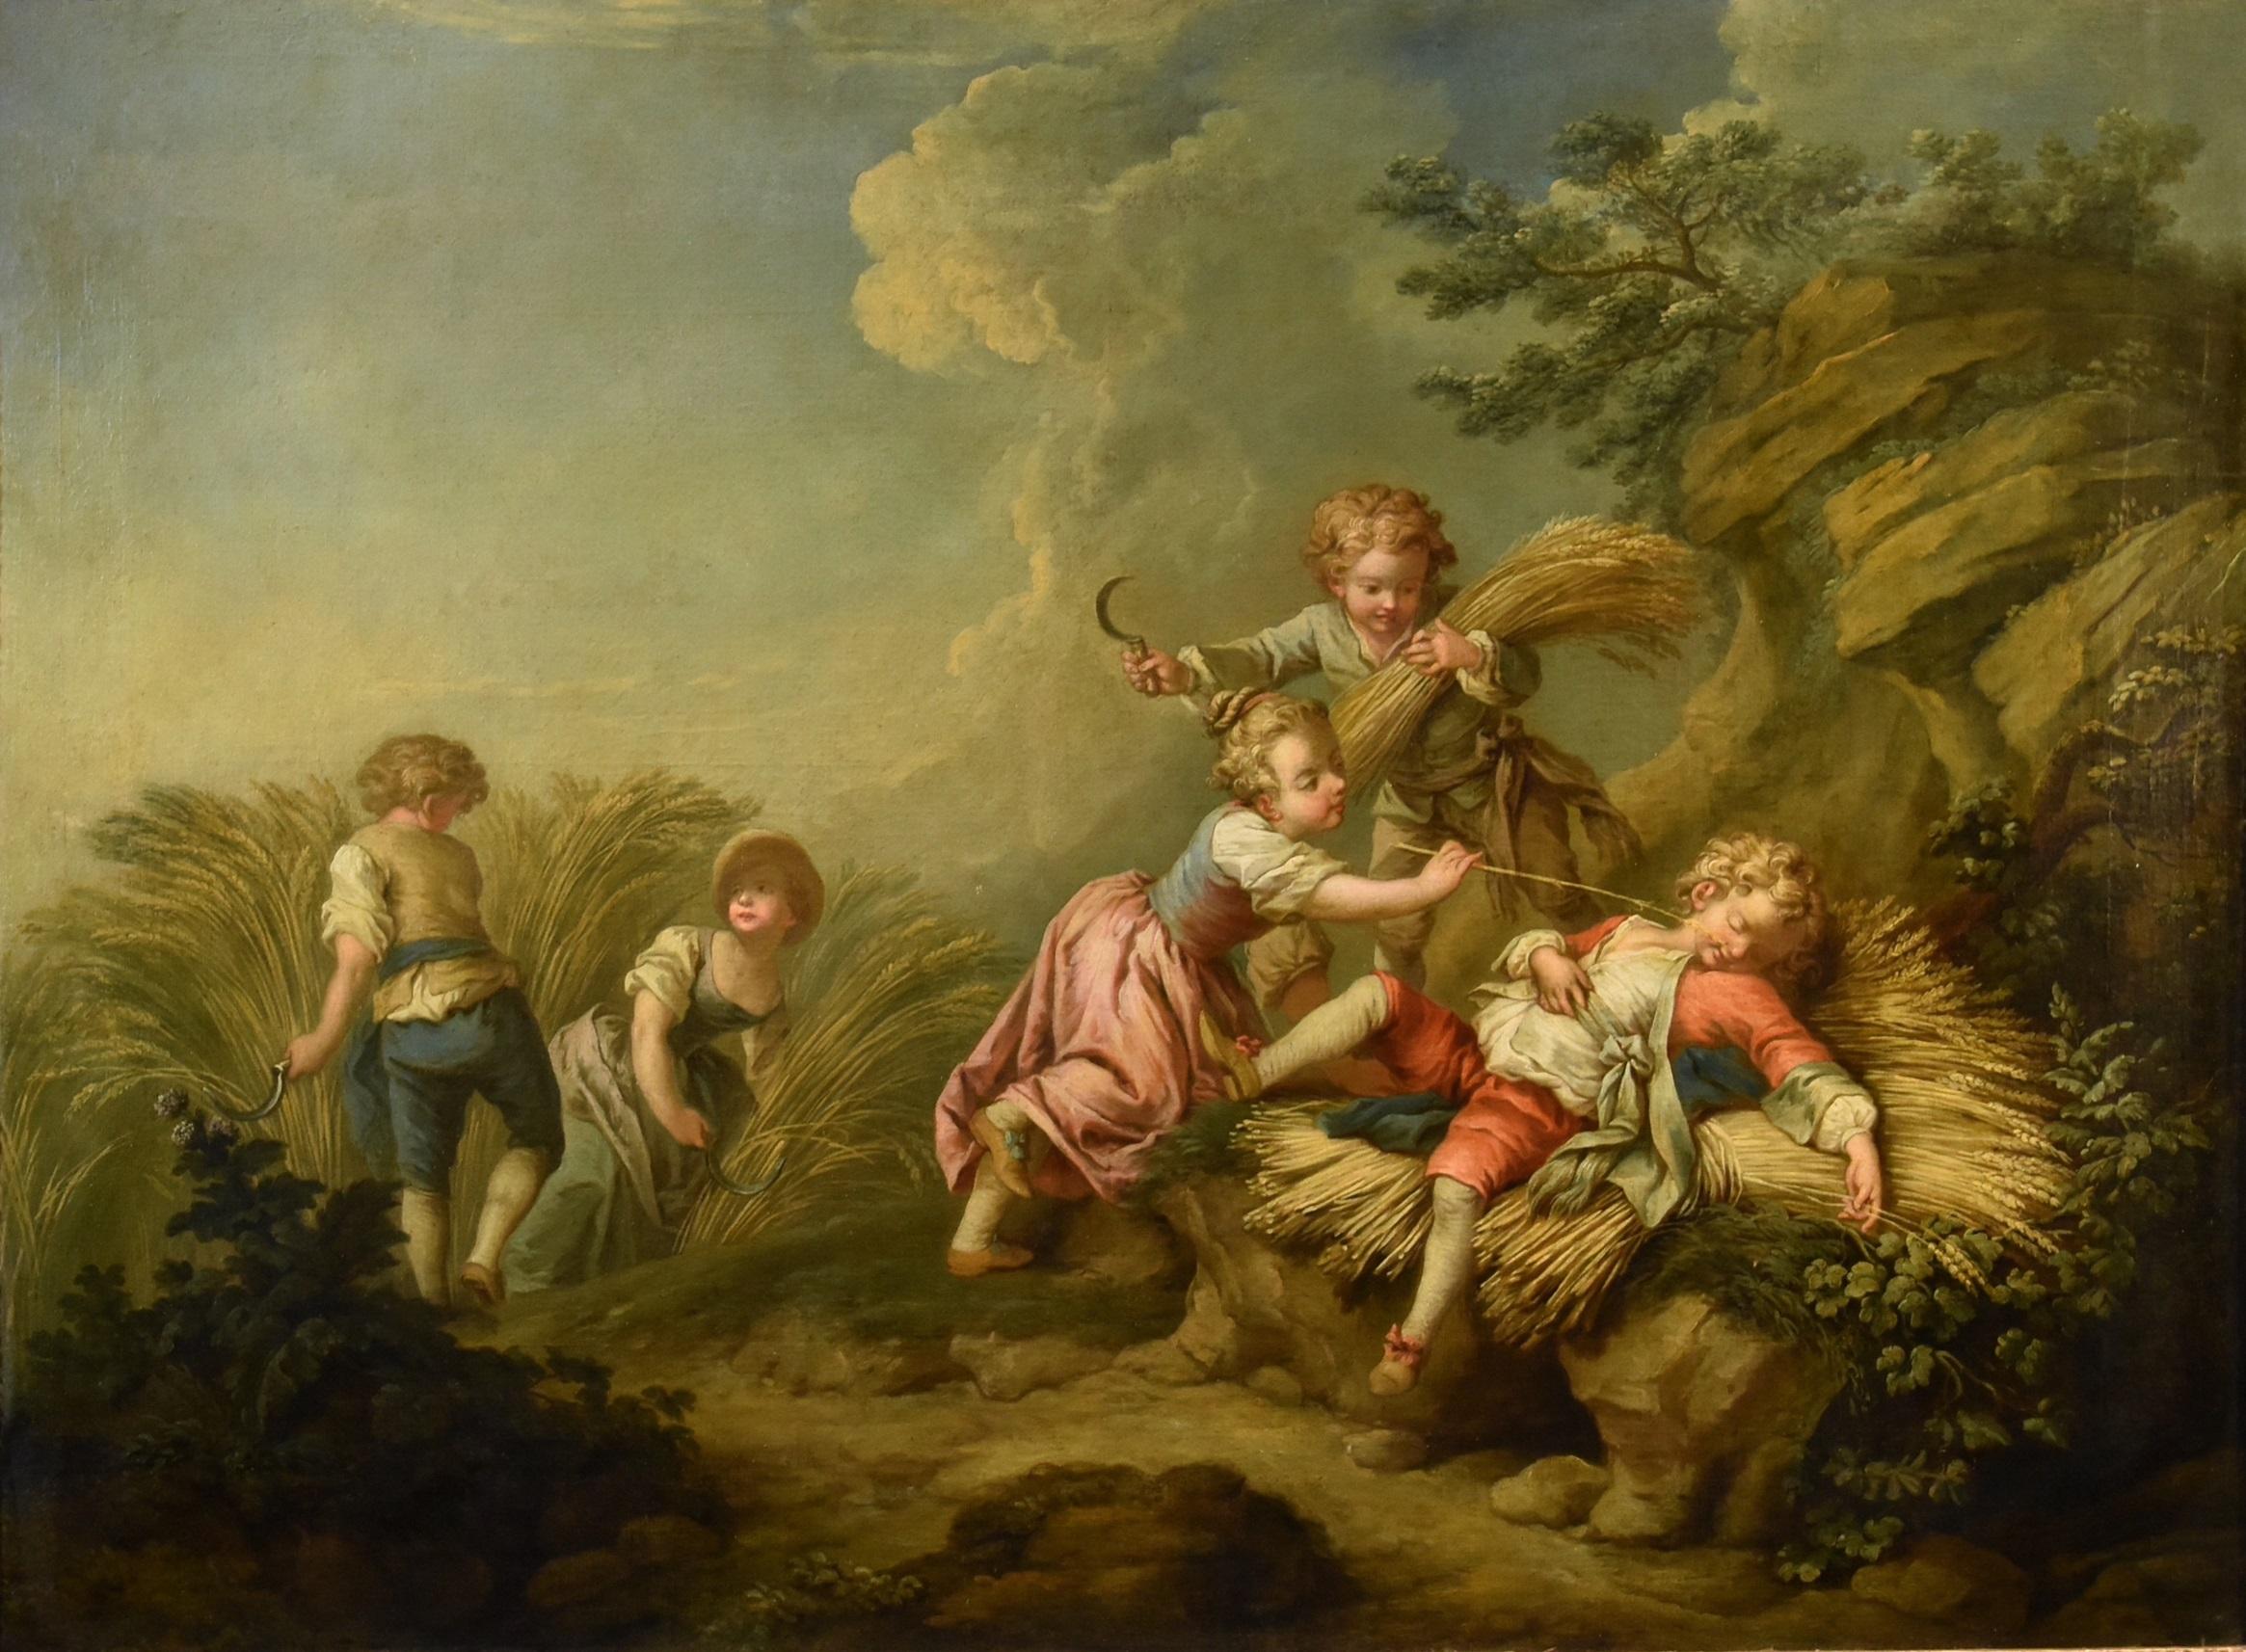 Children Landscape Jeaurat Paint Oil on canvas 18th Century Old master French - Old Masters Painting by Étienne Jeaurat (Vermenton 1699 - Versailles 1789)